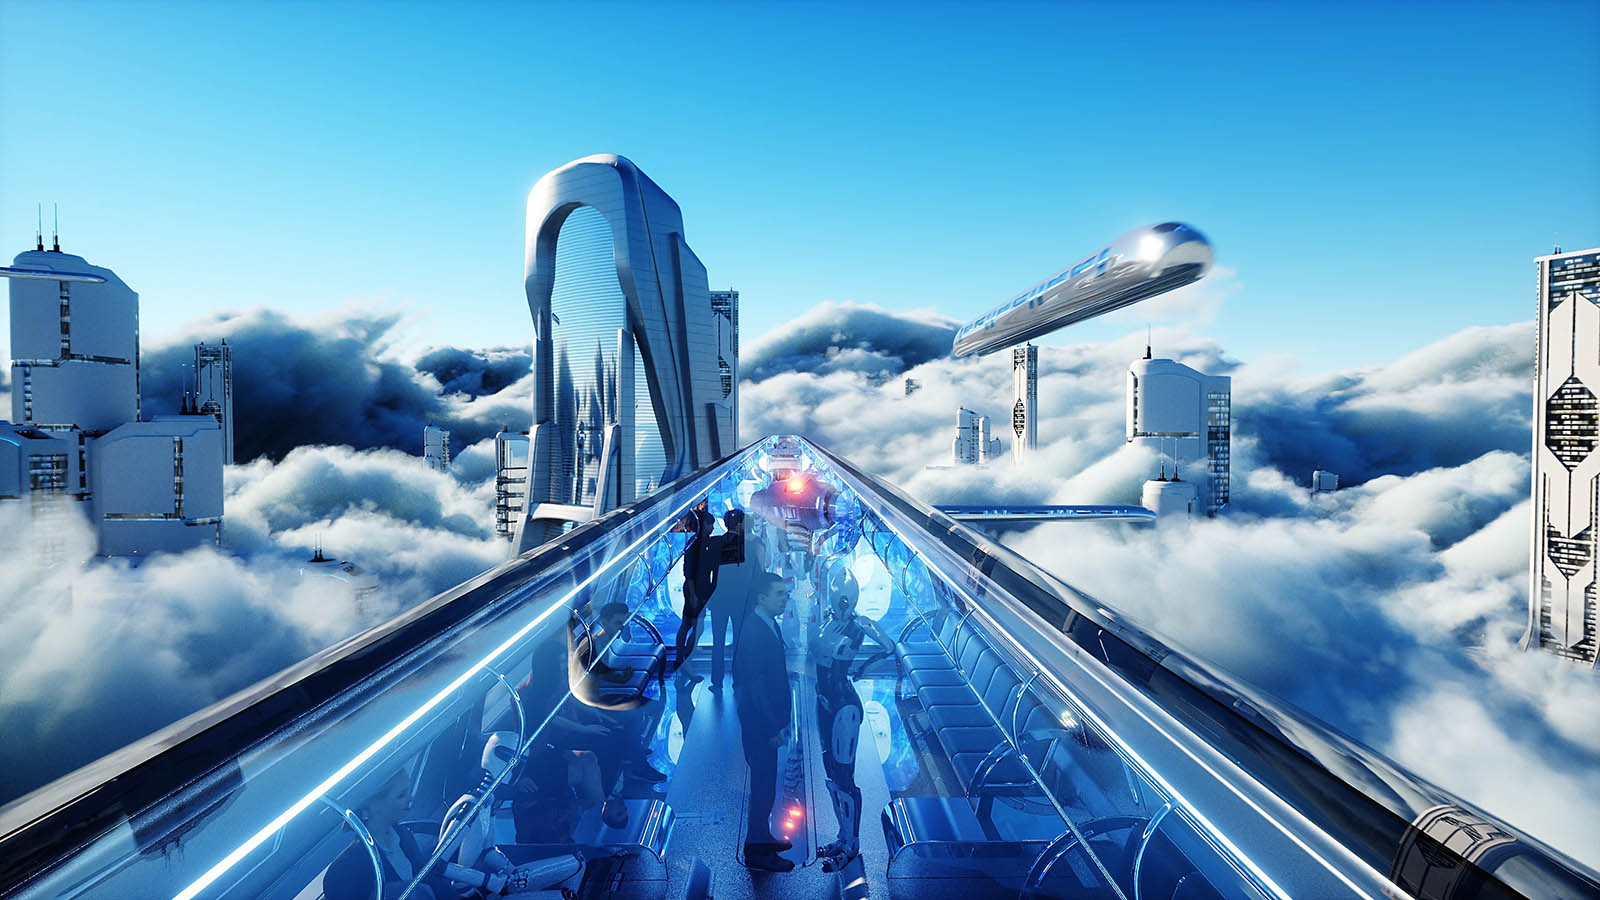 20 Story Ideas About the Future - Science Fiction IdeasScience